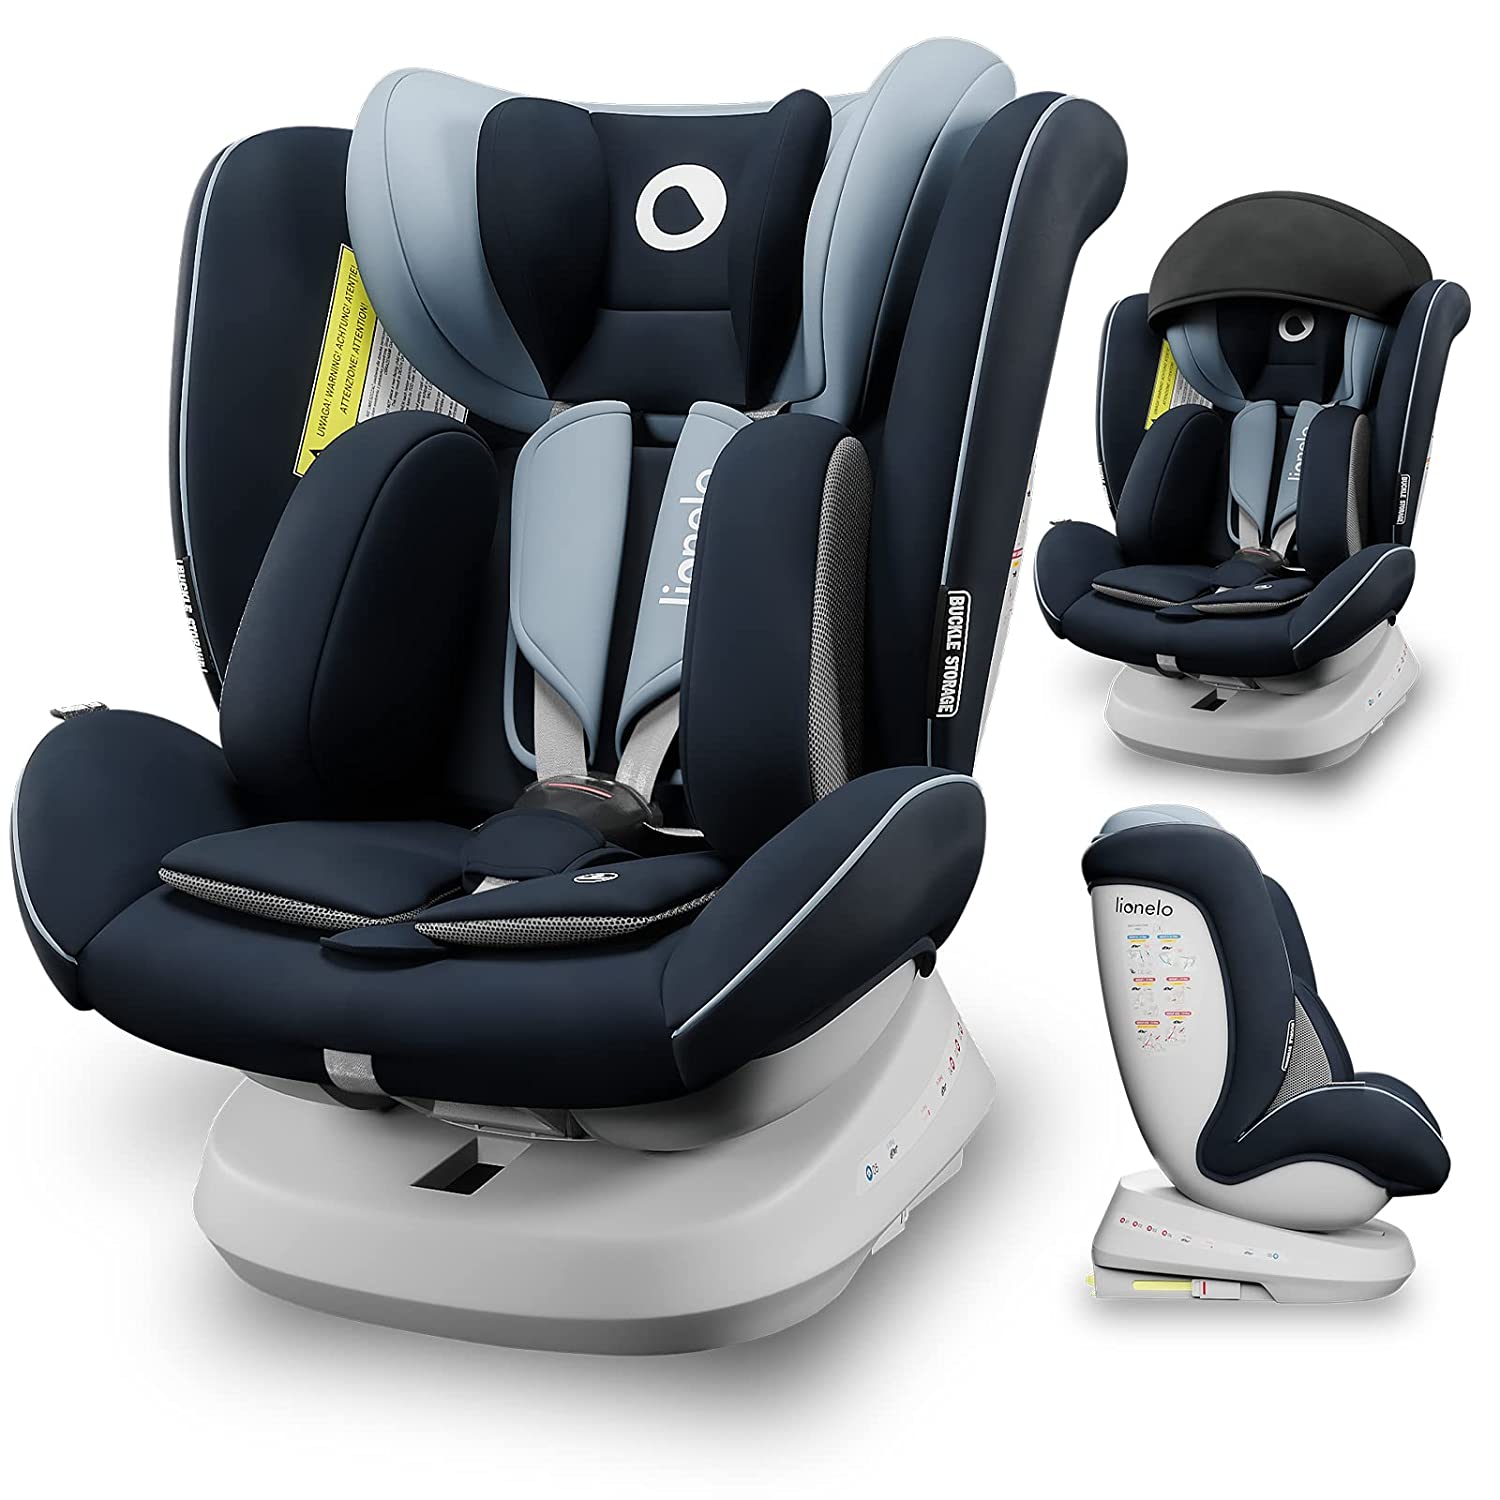 LIONELO Bastiaan ONE Child Seat from Birth 0-36 kg Isofix Top Tether 360 Degree Rotating Backwards Forward Side Protection 5-Point Seat Belts Dri-Seat (Blue)